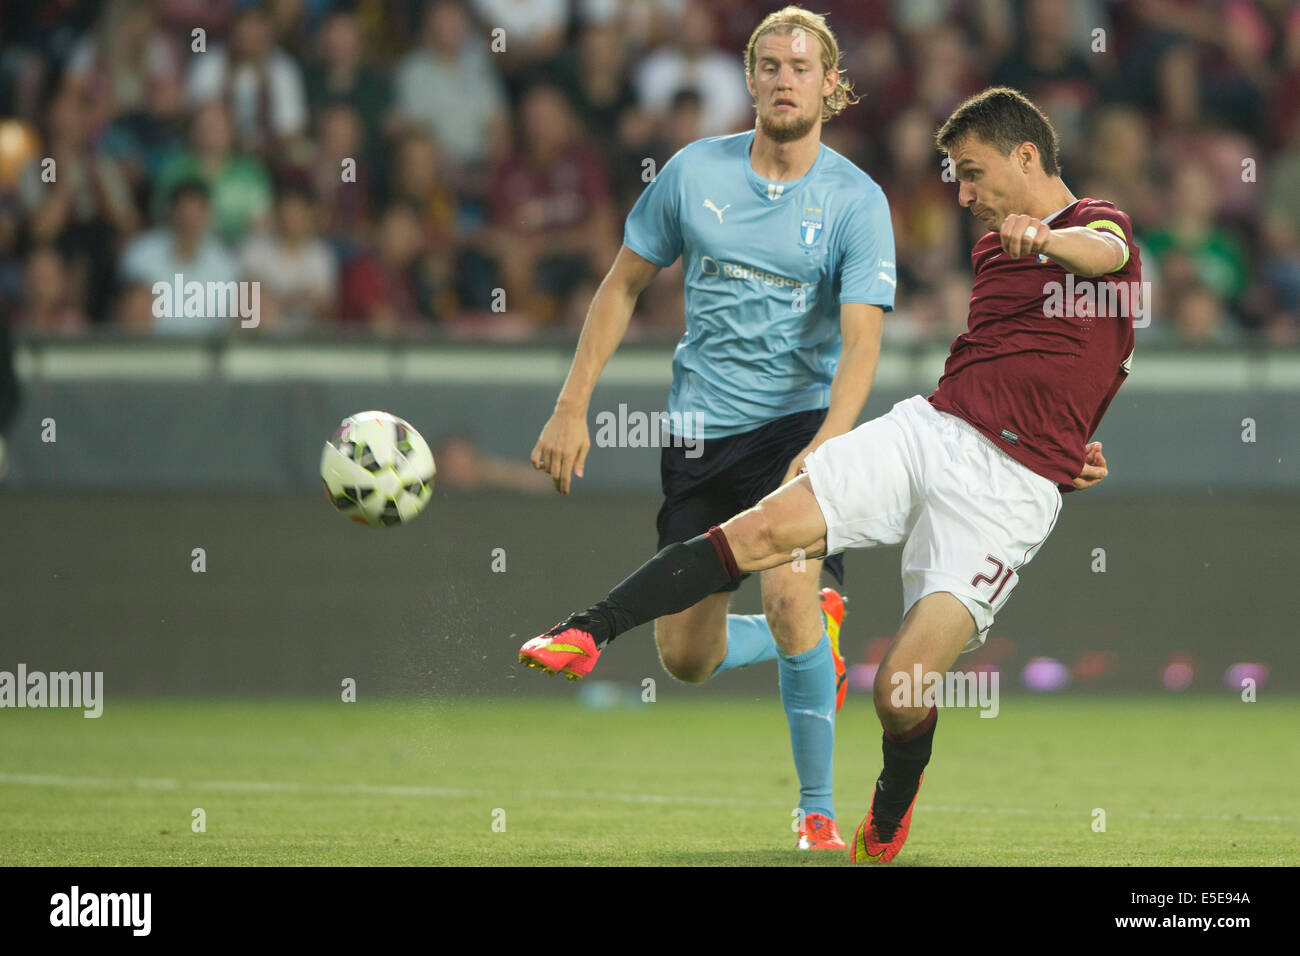 Prague, Czech Republic. 29th July, 2014. Filip Helander of Malmo (left) and David Lafata of Sparta are pictured during the UEFA Champions League 3rd qualifying round opening match AC Sparta Praha vs. Malmo FF, Prague, Czech Republic, on Tuesday, July 29, 2014. © CTK/Alamy Live News Stock Photo